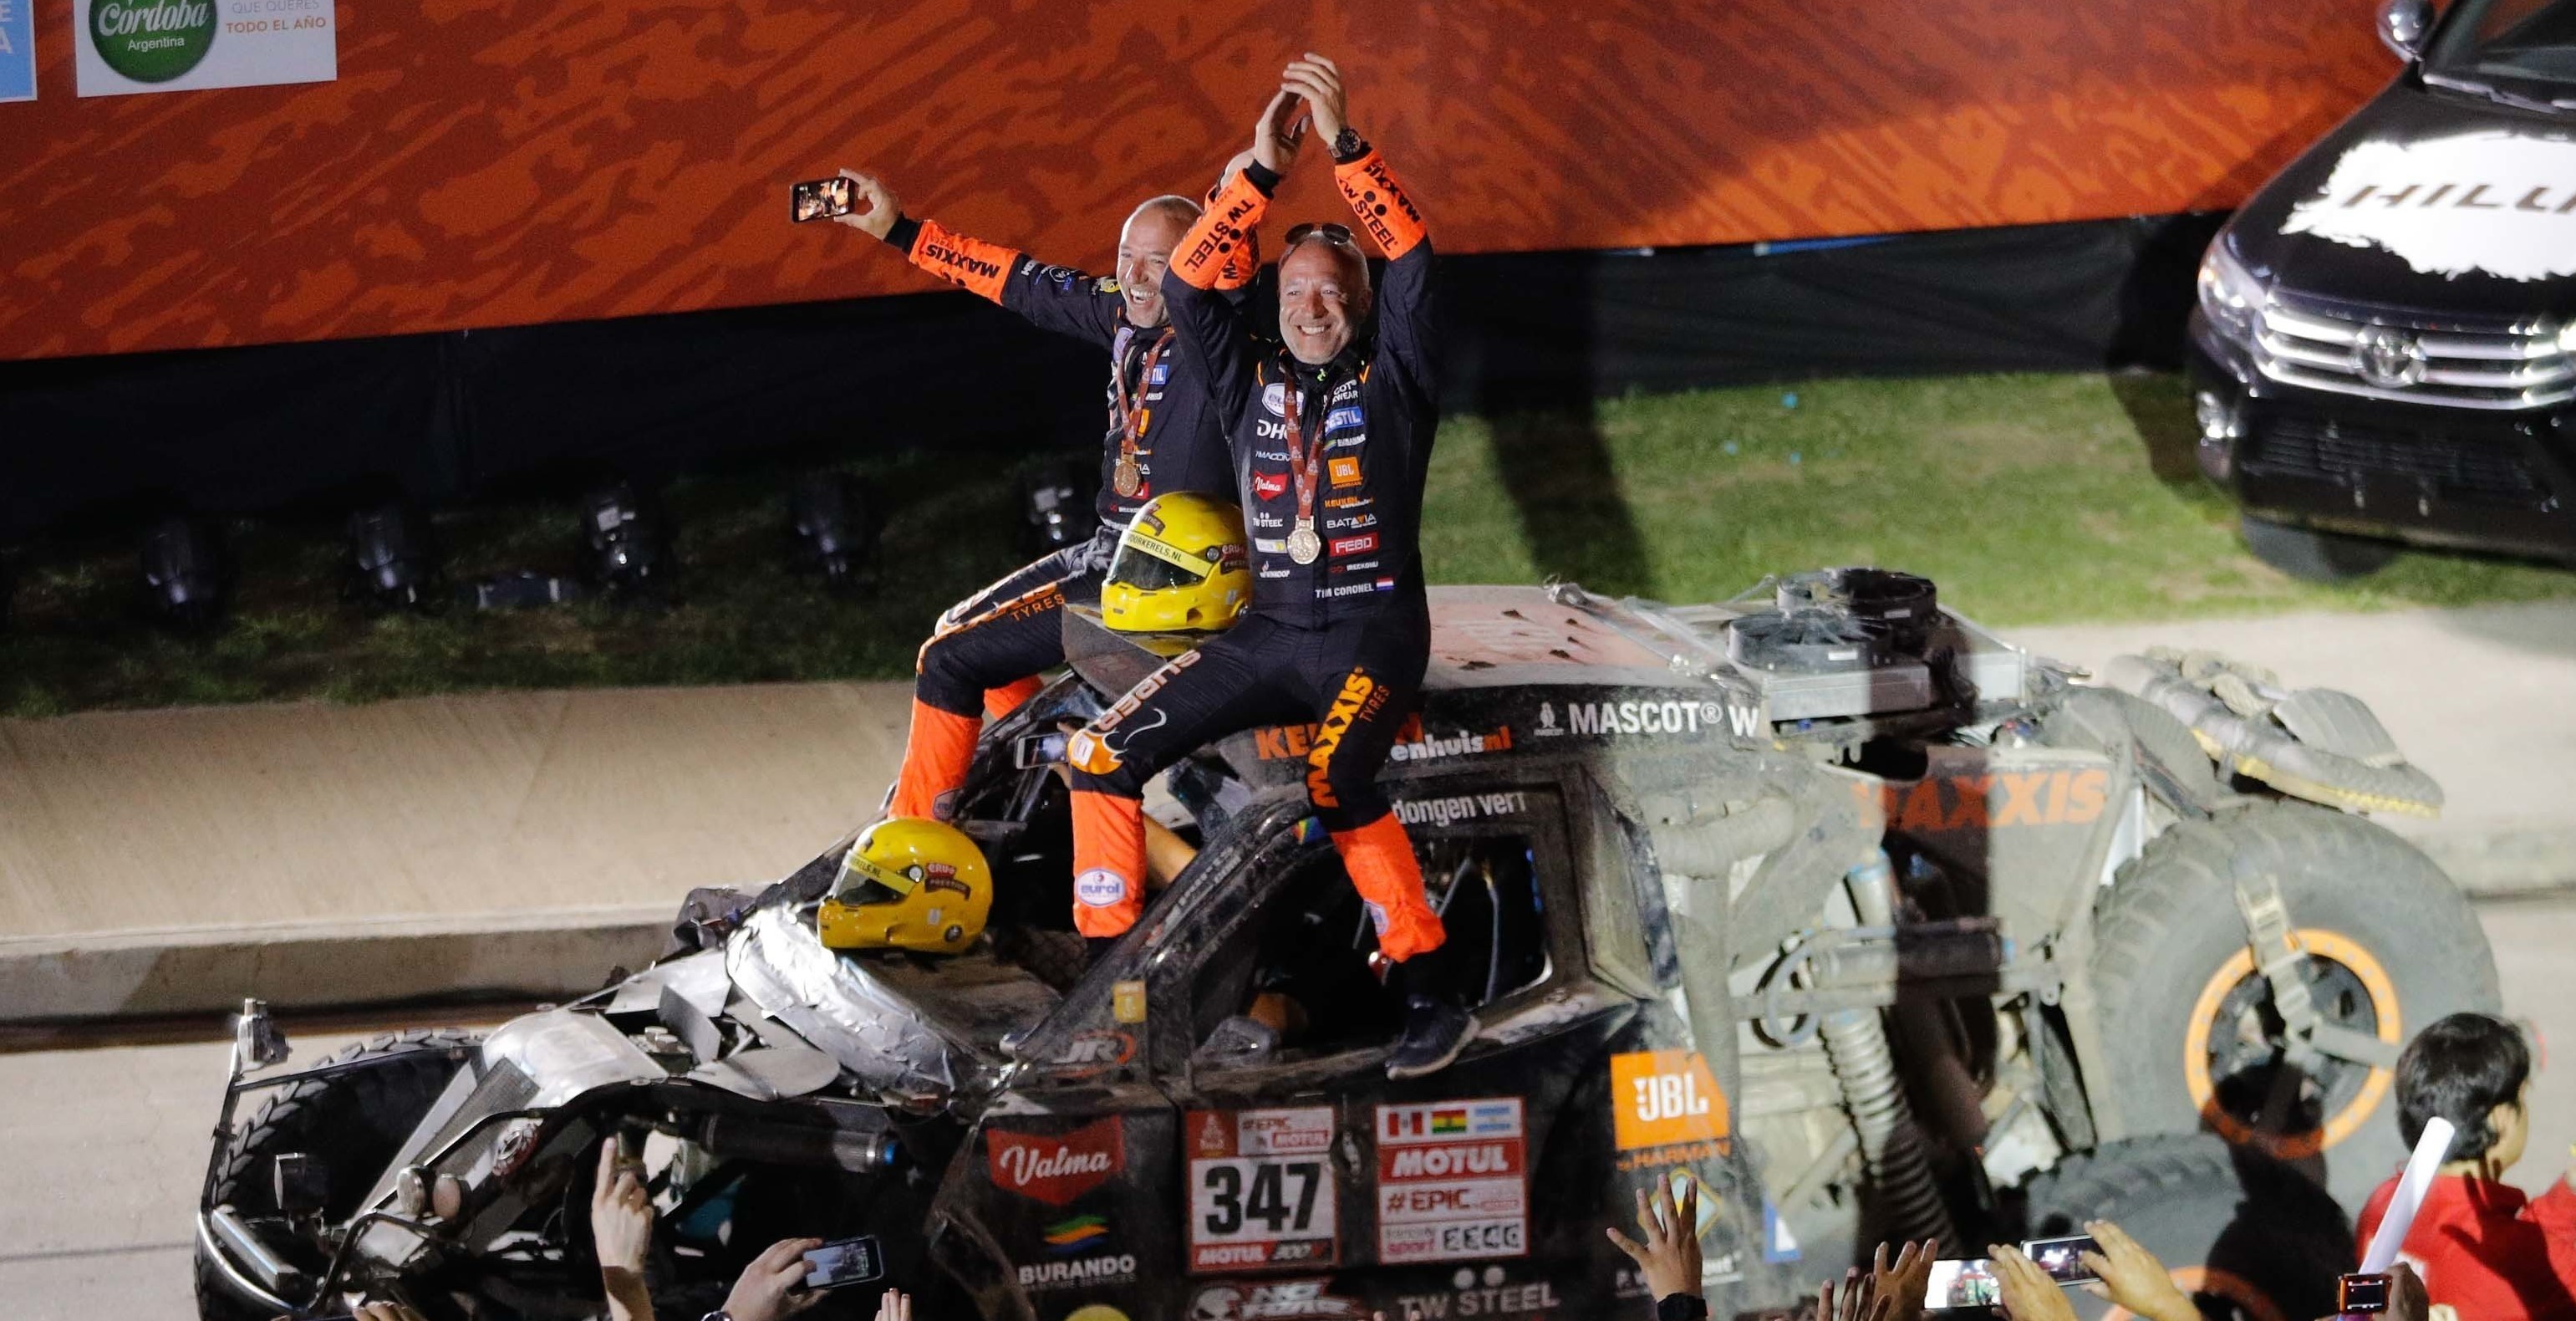 Celebrations at the finish line for the Coronel brothers and Maxxis at the 2018 Dakar Rally